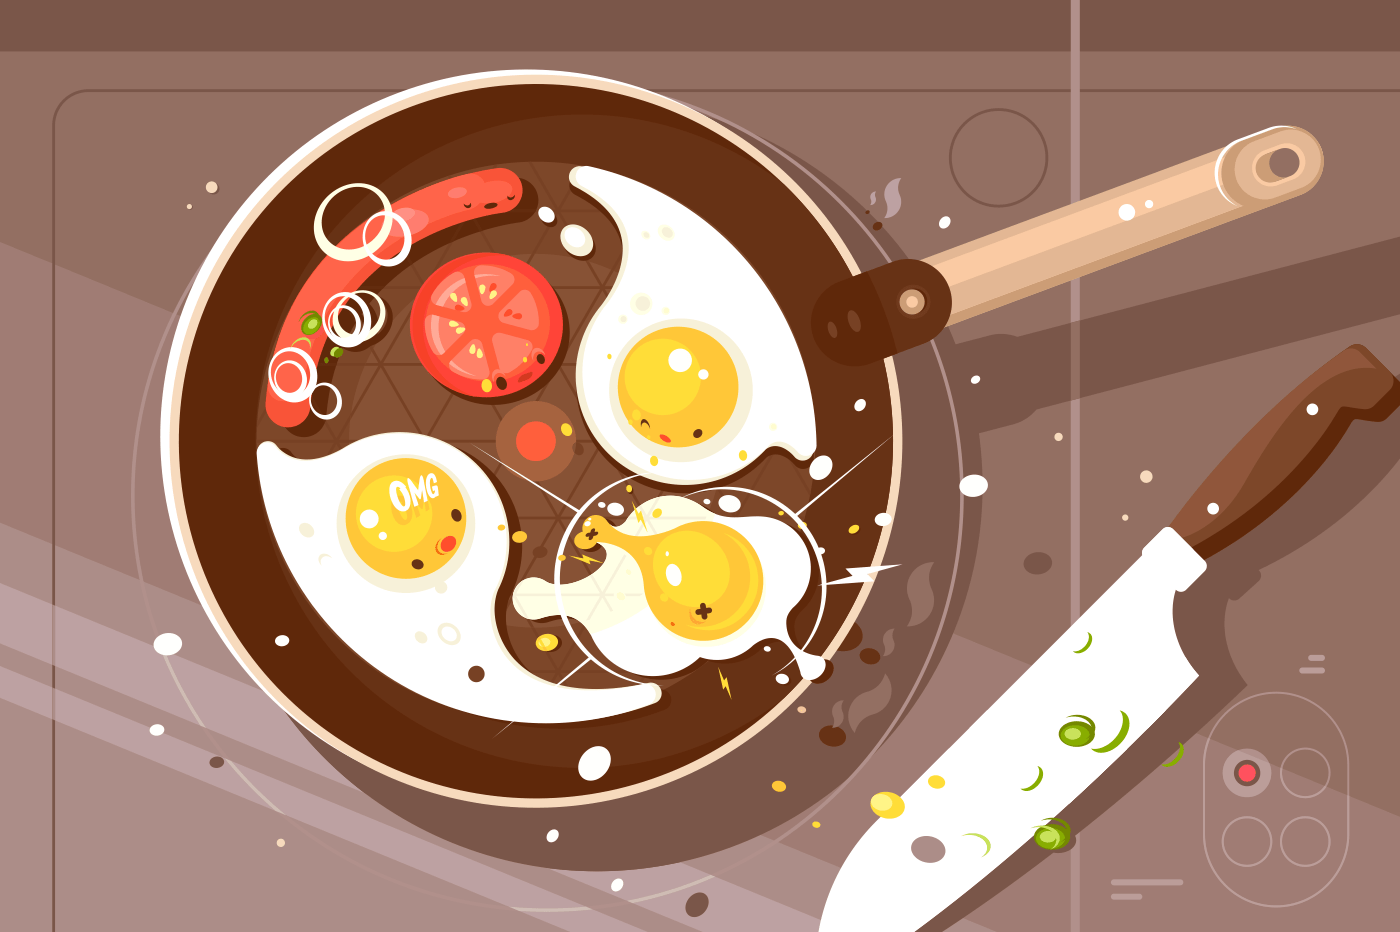 Fry delicious scrambled eggs and sausage in frying pan. Appetizing breakfast view from above. Vector illustration